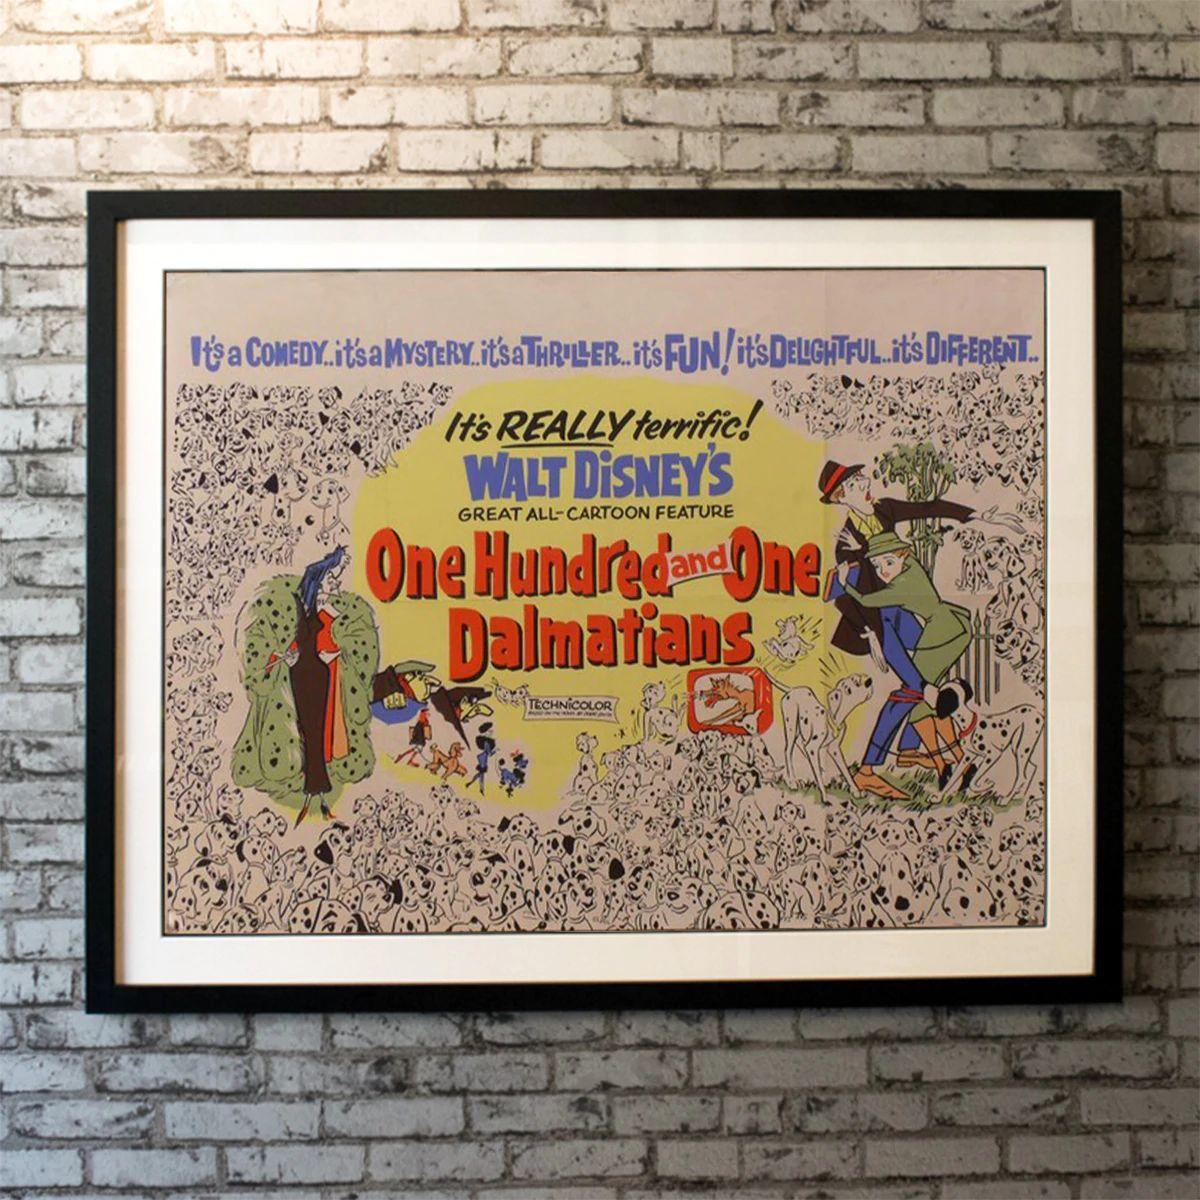 One Hundred and One Dalmatians, Unframed Poster, 1969

Original British Quad (30 x 40 Inches). When a litter of Dalmatian puppies are abducted by the minions of Cruella de Vil, the parents must find them before she uses them for a diabolical